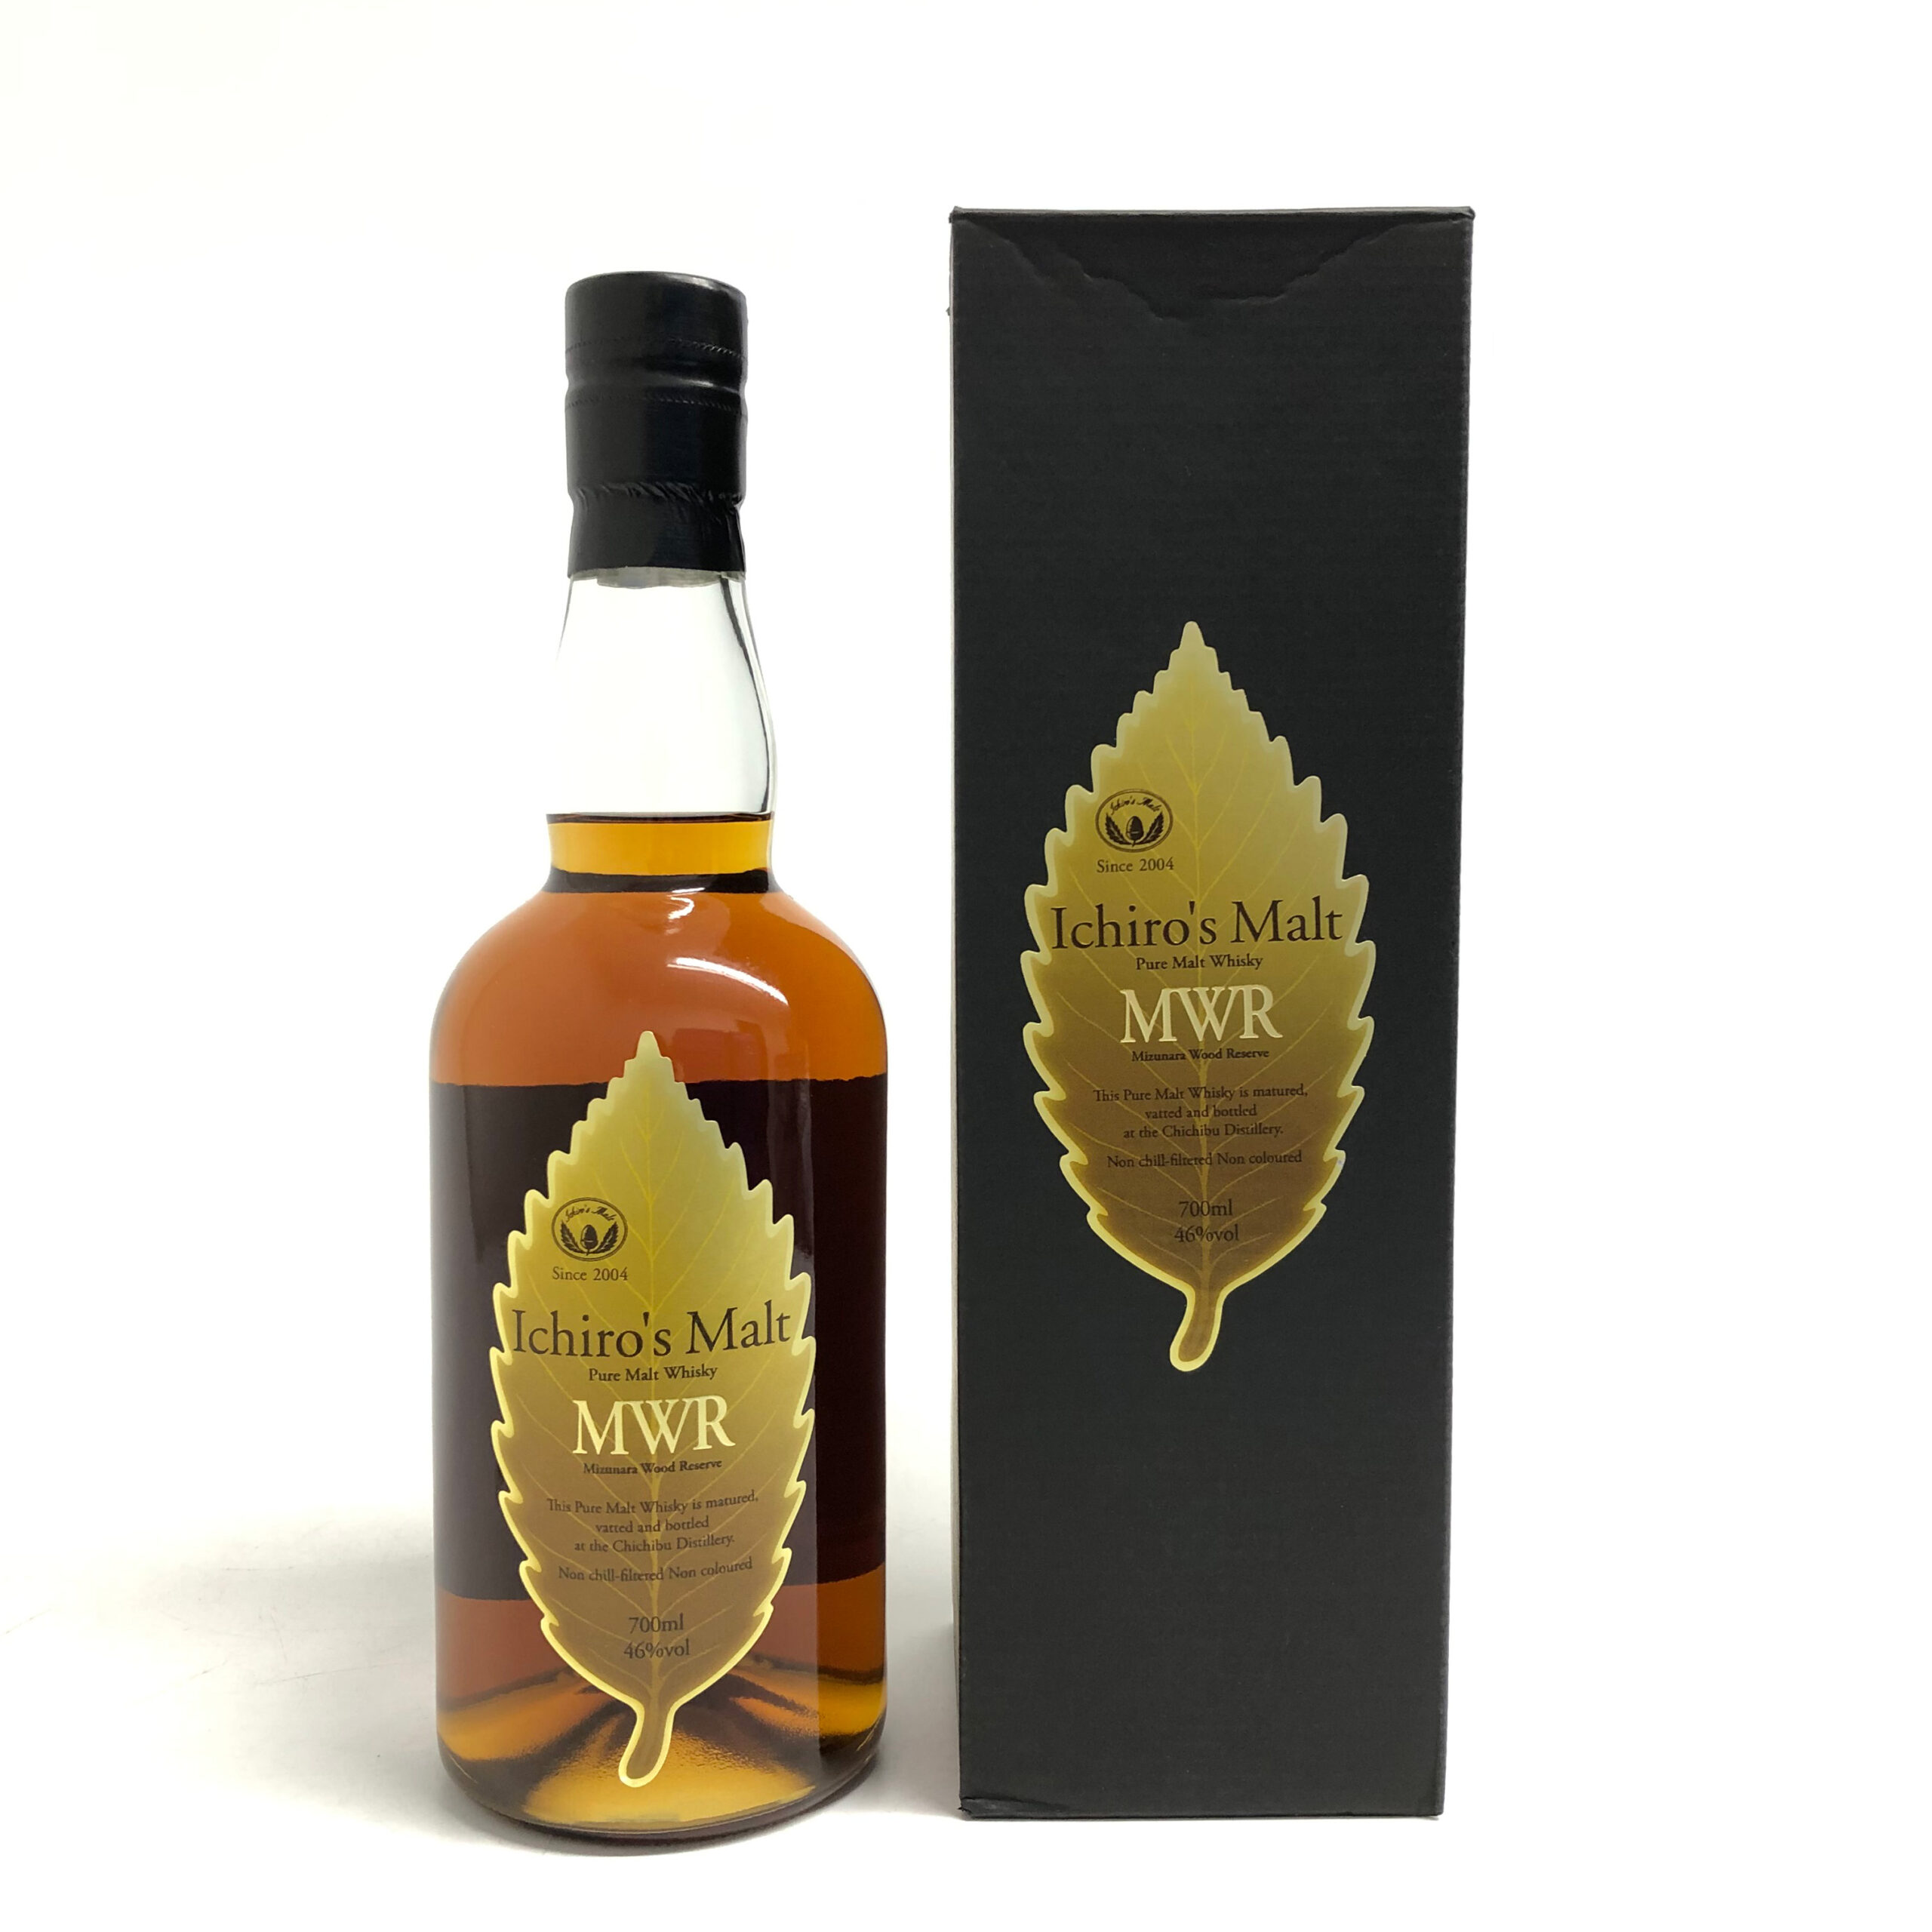 【Ichiro's Malt Series.】「Venture Whisky Ichiro's Malt Mizunara Wood Reserve.」Ichiro's Malt Series is the first of Venture whisky produced at the Chichibu distillery in Saitama Prefecture, named after the founder, Ichiro Akuto. Mizunara oak is purchased from Hokkaido and the casks are manufactured in-house to produce a particular whisky.